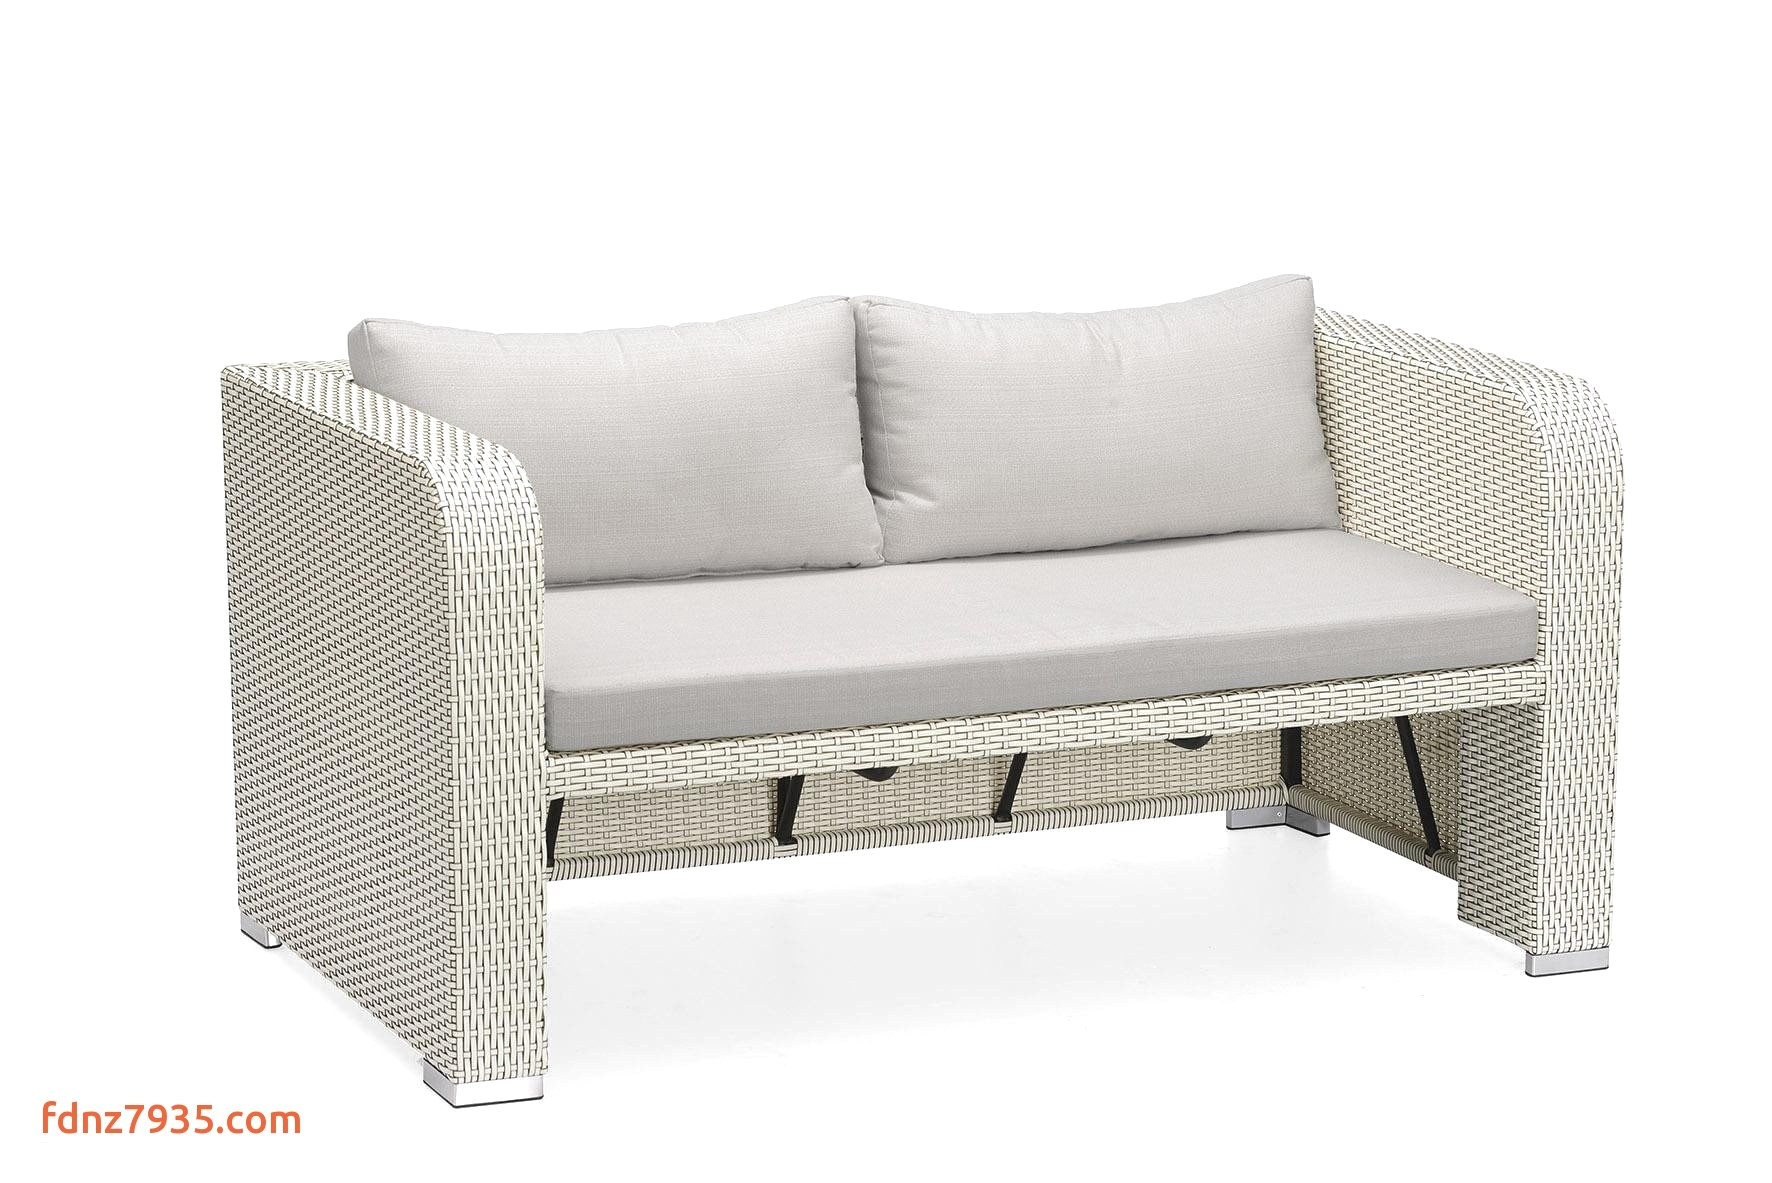 wicker sectional patio furniture awesome furniture outdoor loveseat elegant wicker outdoor sofa 0d patio pottery barn